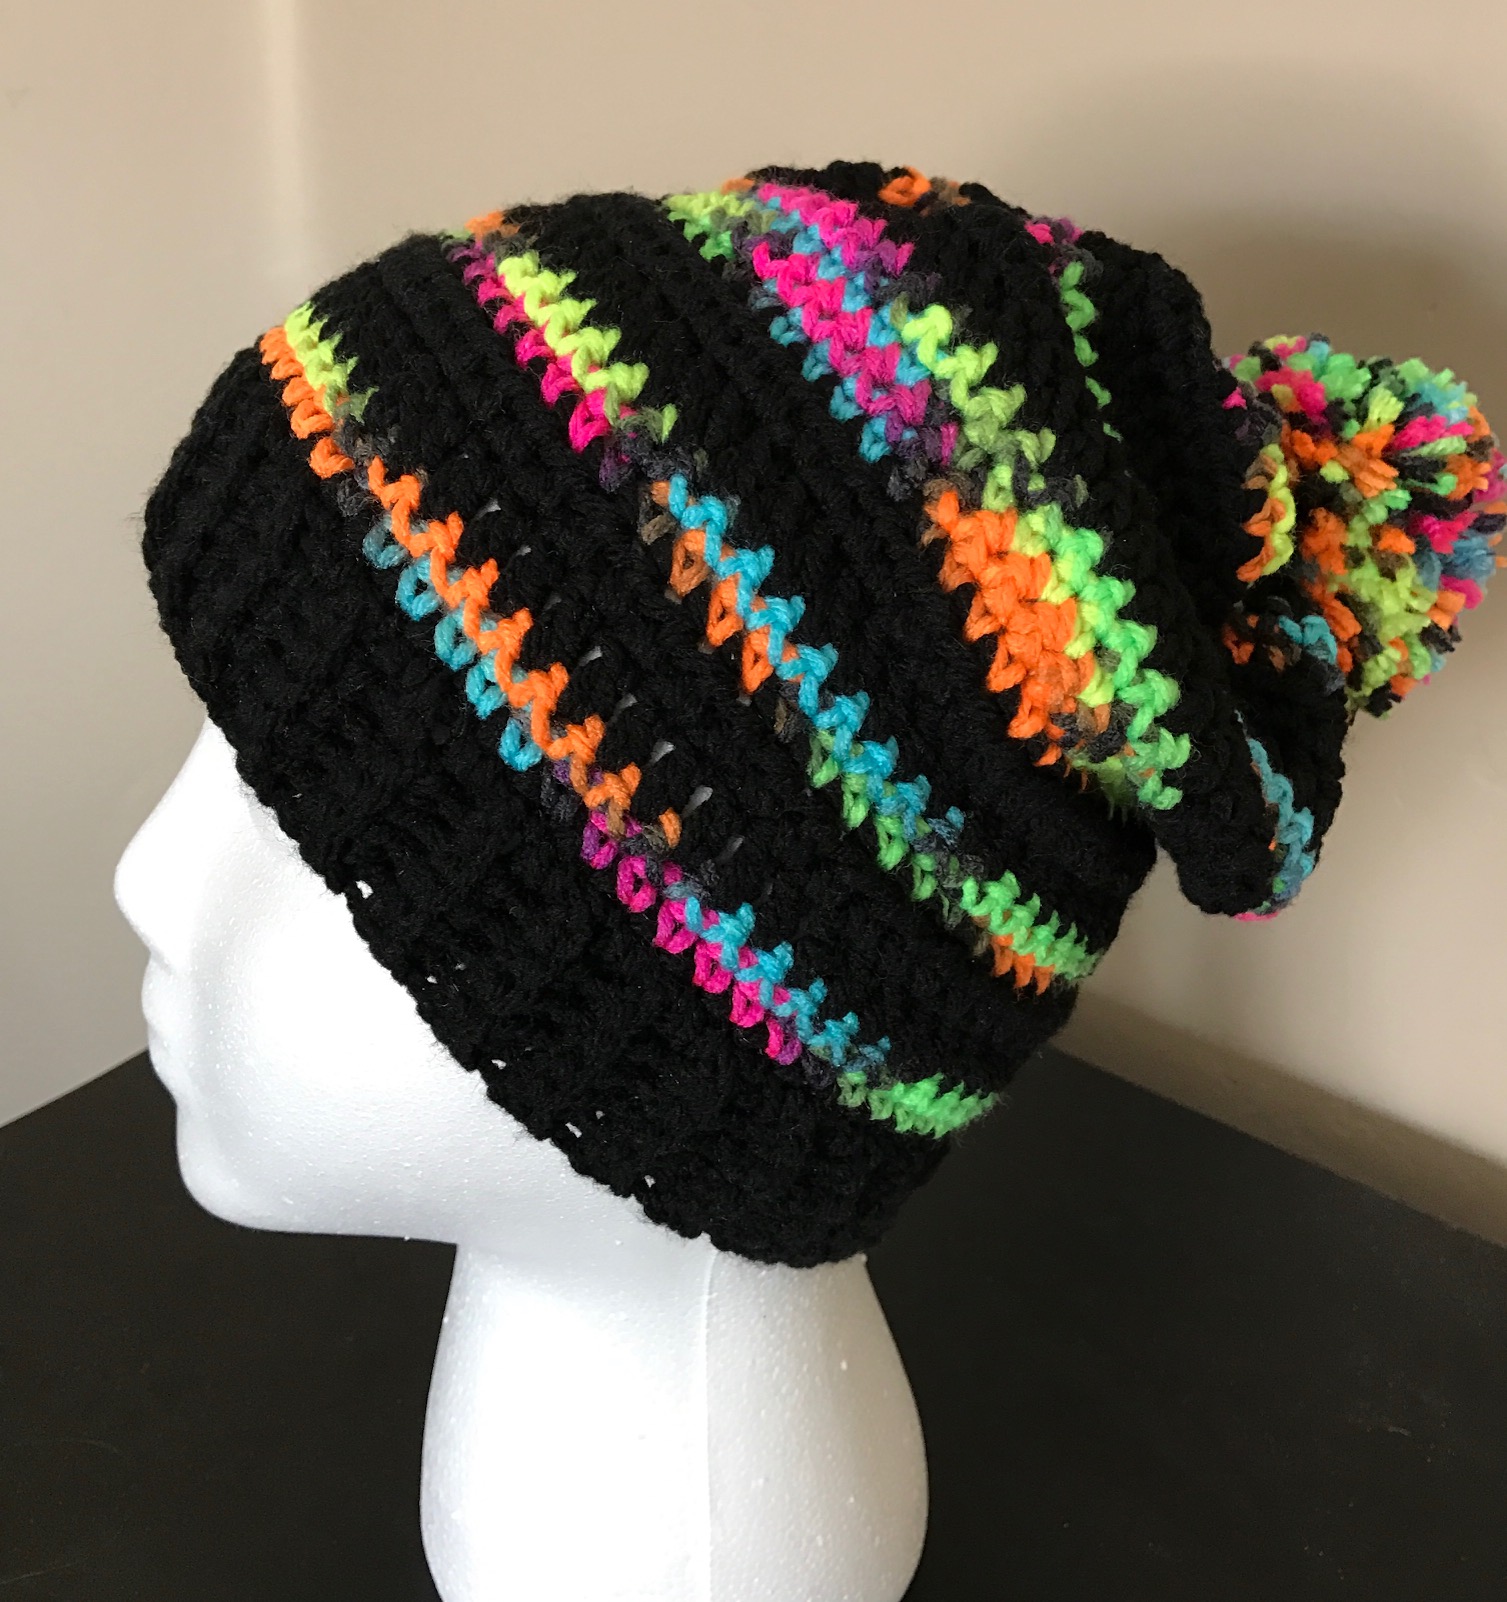 I adore this crochet hat! The bright colors just pop against the black! Great free pattern!